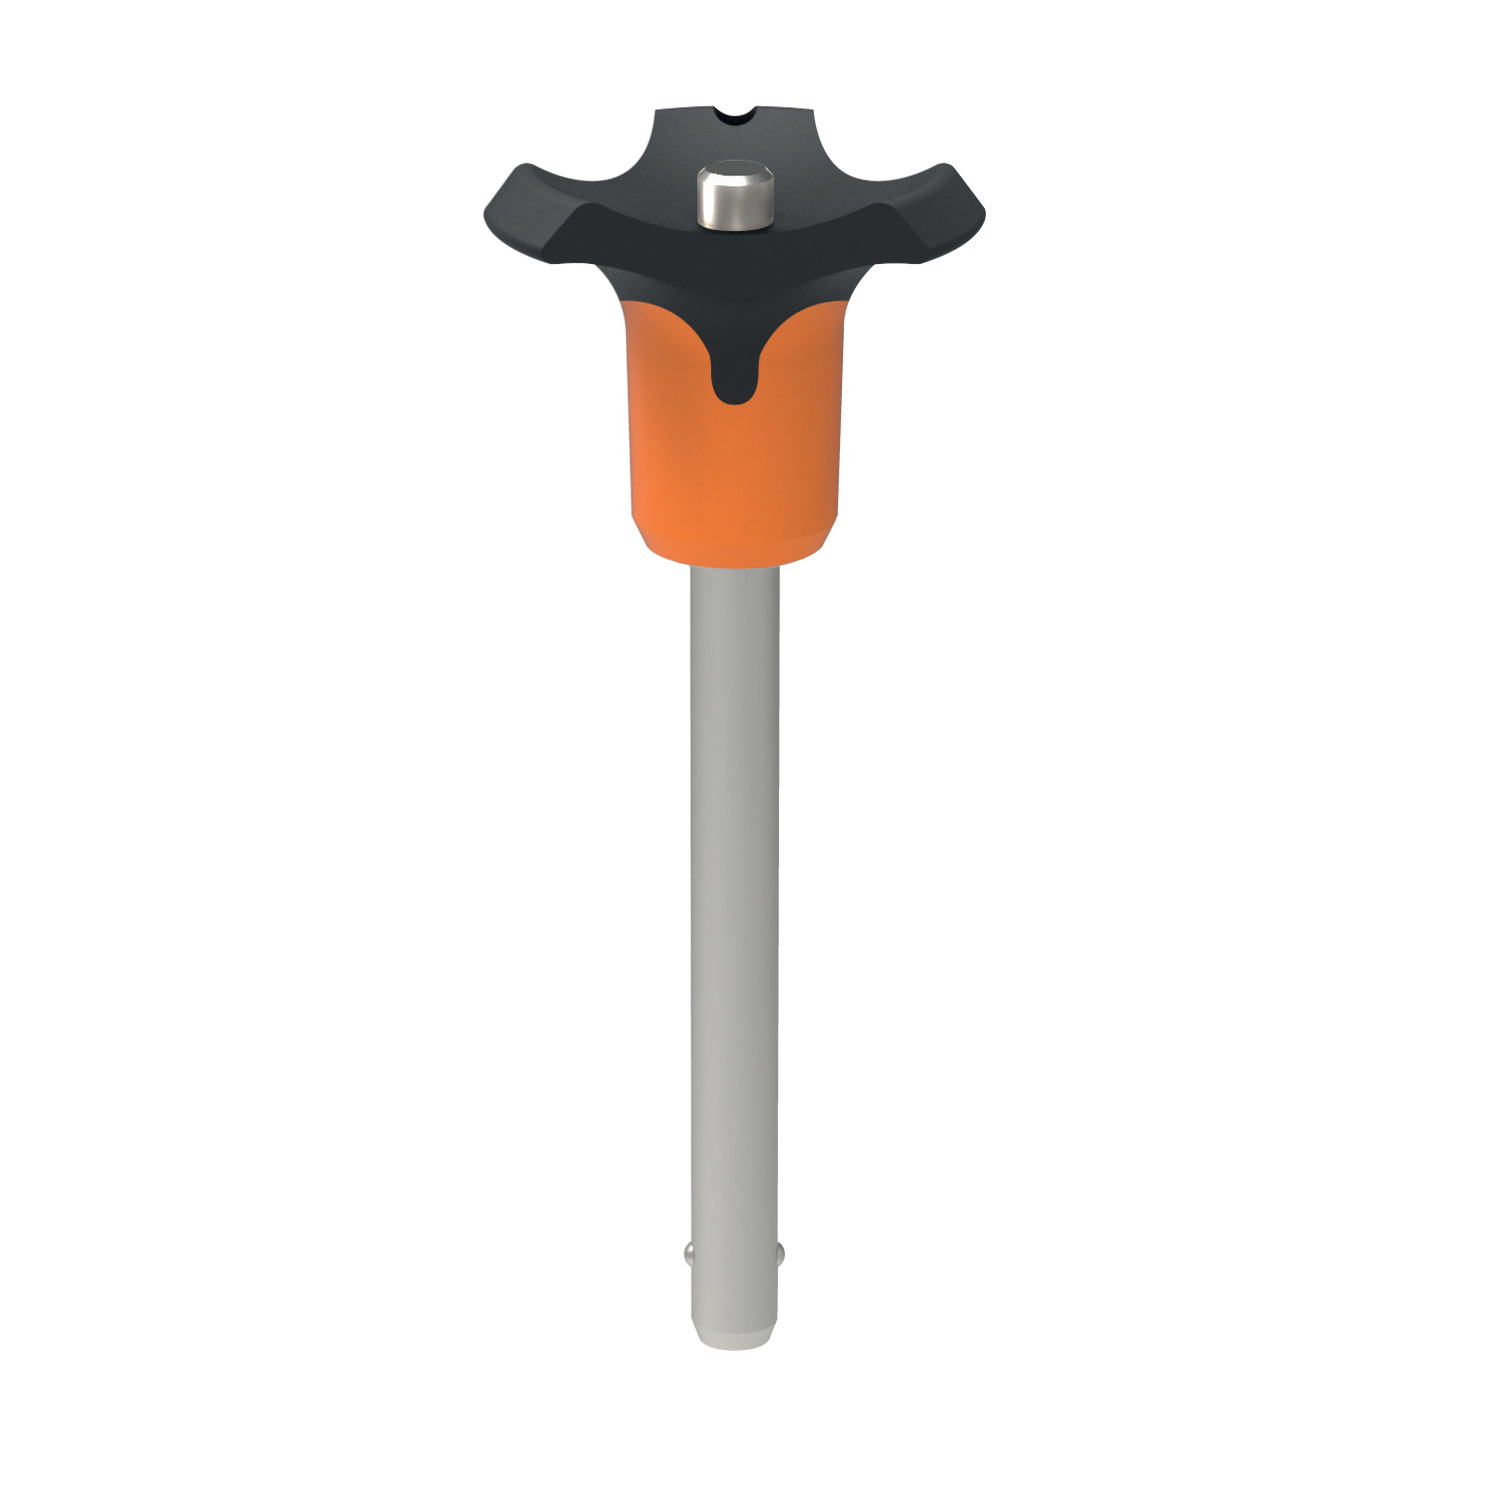 Ball Lock Pins - Single Acting - Orange Plastic Handle Single acting plastic handle ball lock pins in four different colours (orange, blue, grey and black) to coordinate with your required application colour scheme. For reliable, repeated connection of parts, with high shear forces.